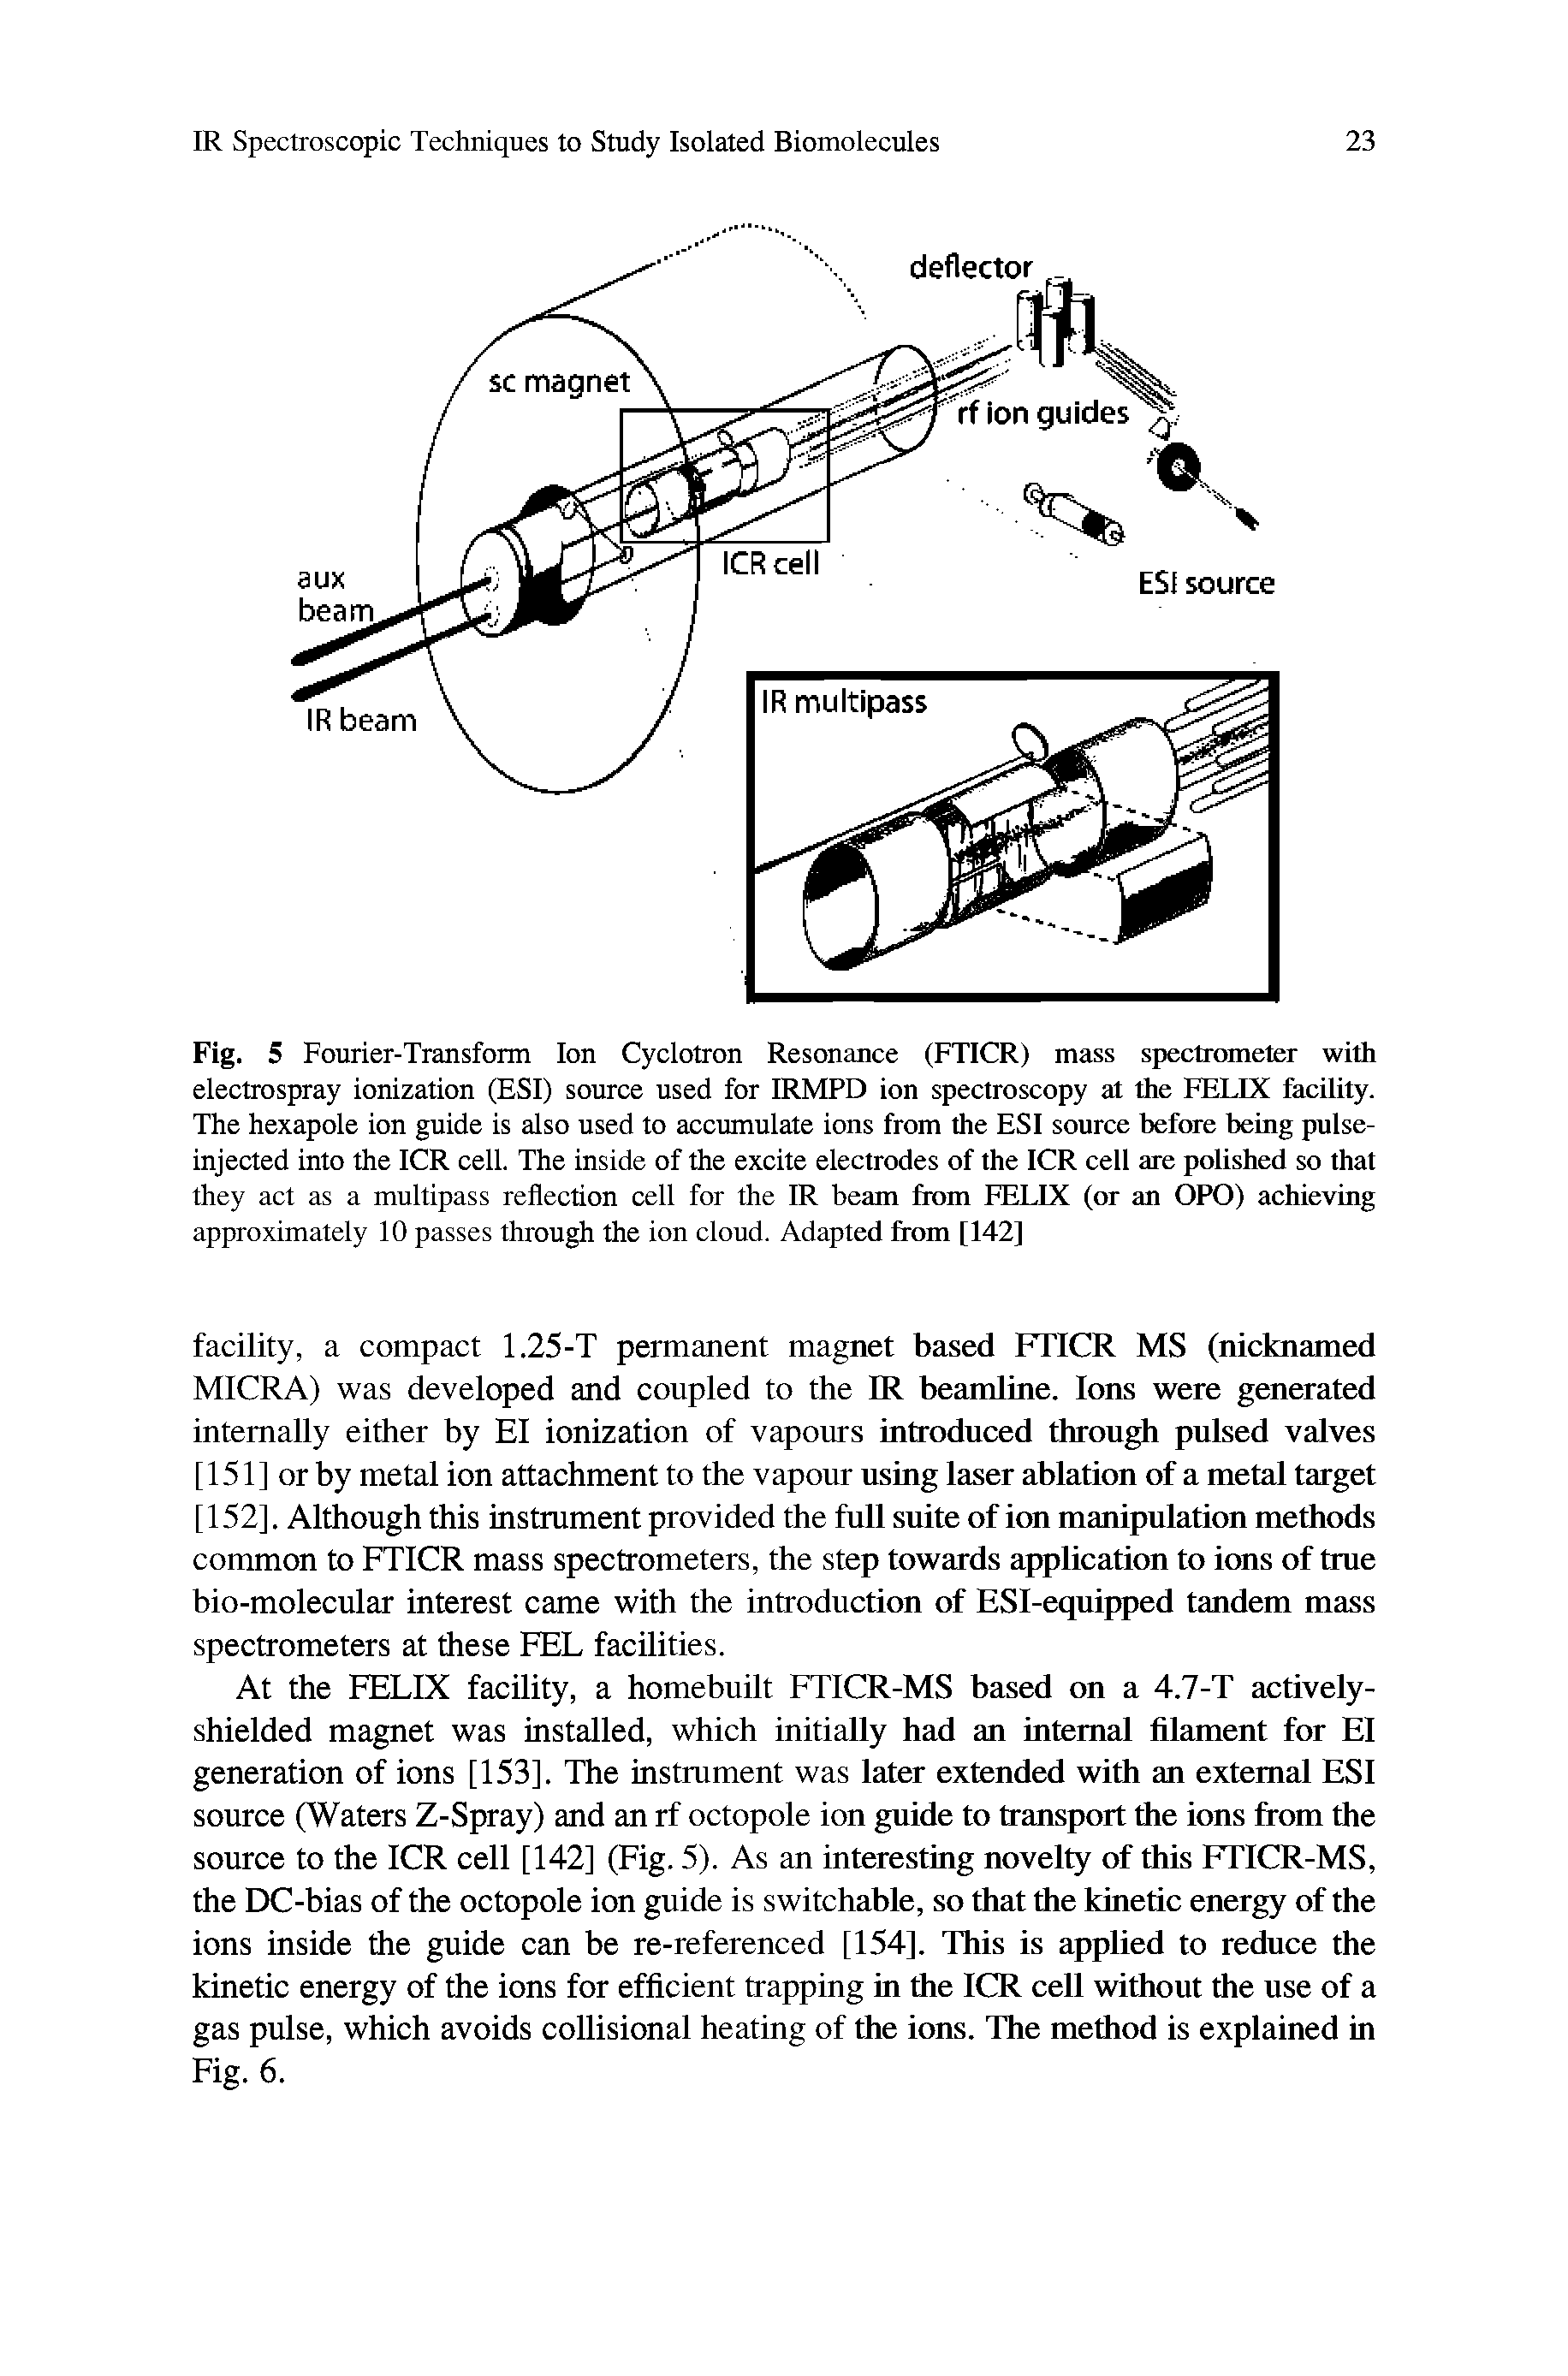 Fig. 5 Fourier-Transform Ion Cyclotron Resonance (FTICR) mass spectrometer with electrospray ionization (ESI) source used for IRMPD ion spectroscopy at the FELIX facility. The hexapole ion guide is also used to accumulate ions from the ESI source before being pulse-injected into the ICR ceil. The inside of the excite electrodes of the ICR cell are polished so that they act as a multipass reflection ceil for the IR beam fiom FELIX (or an OPO) achieving approximately 10 passes through the ion cloud. Adapted from [142]...